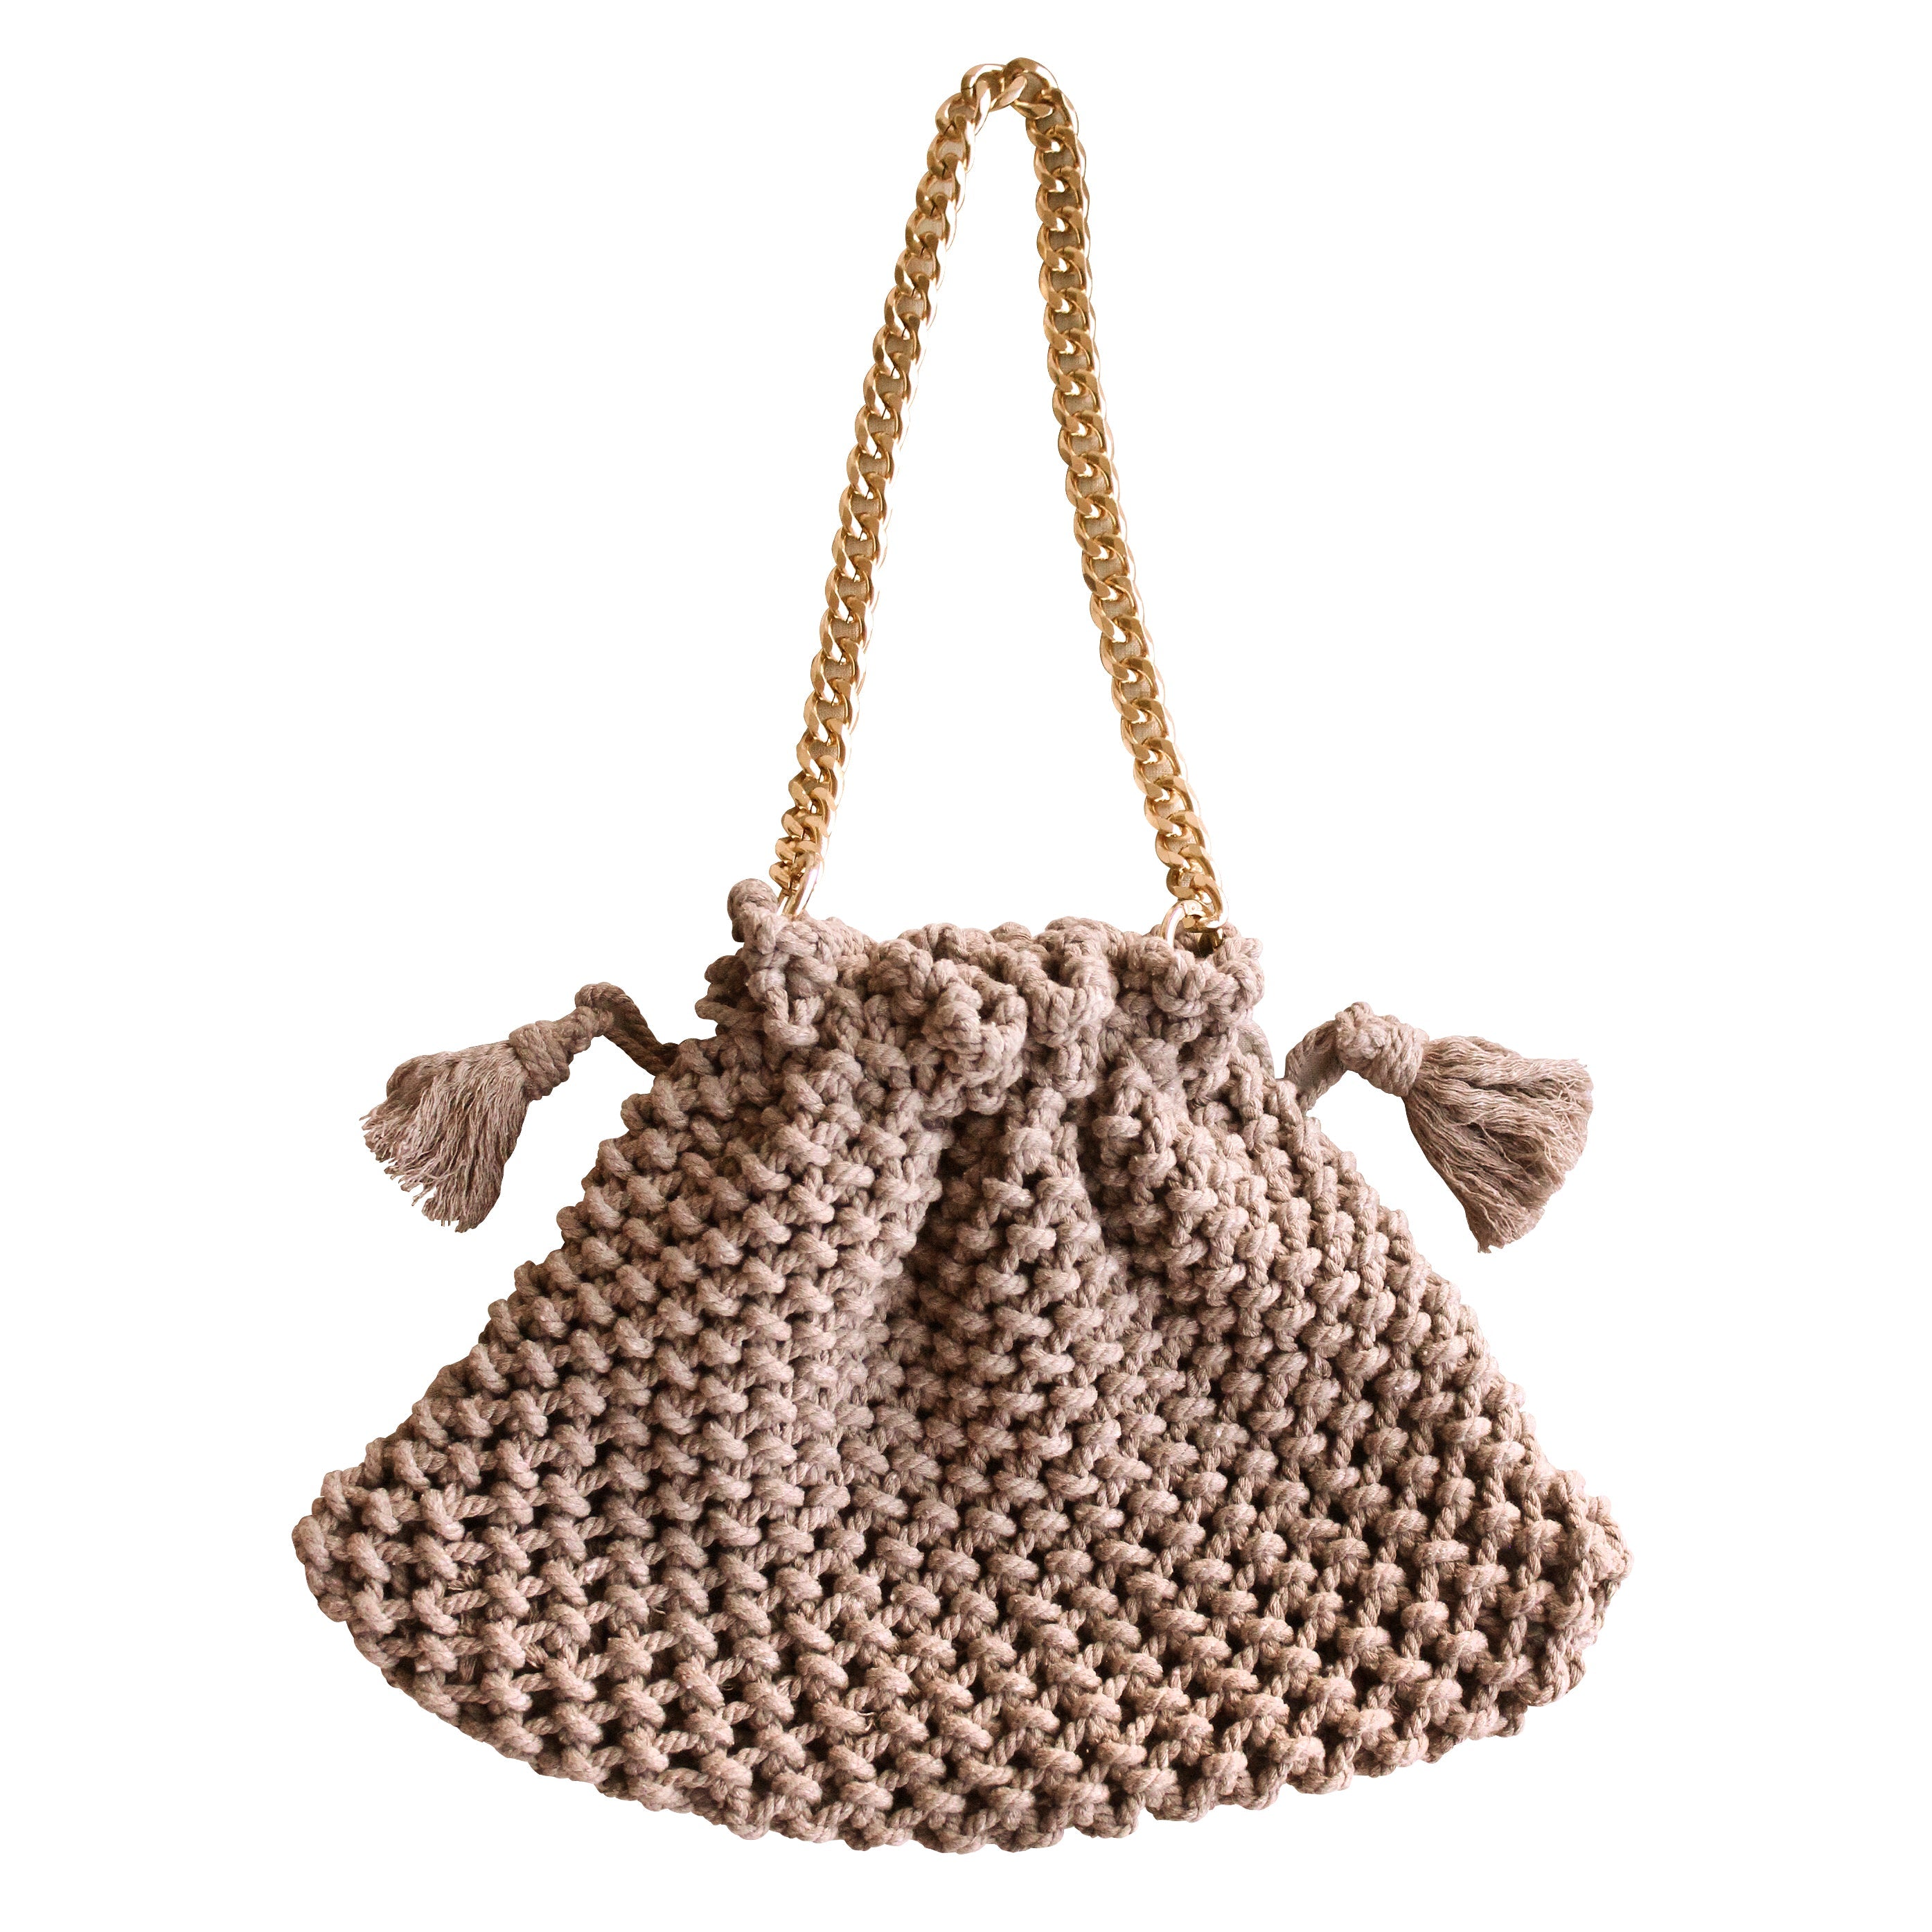 Lyon Macramé Tote Bag, in Toasted Beige